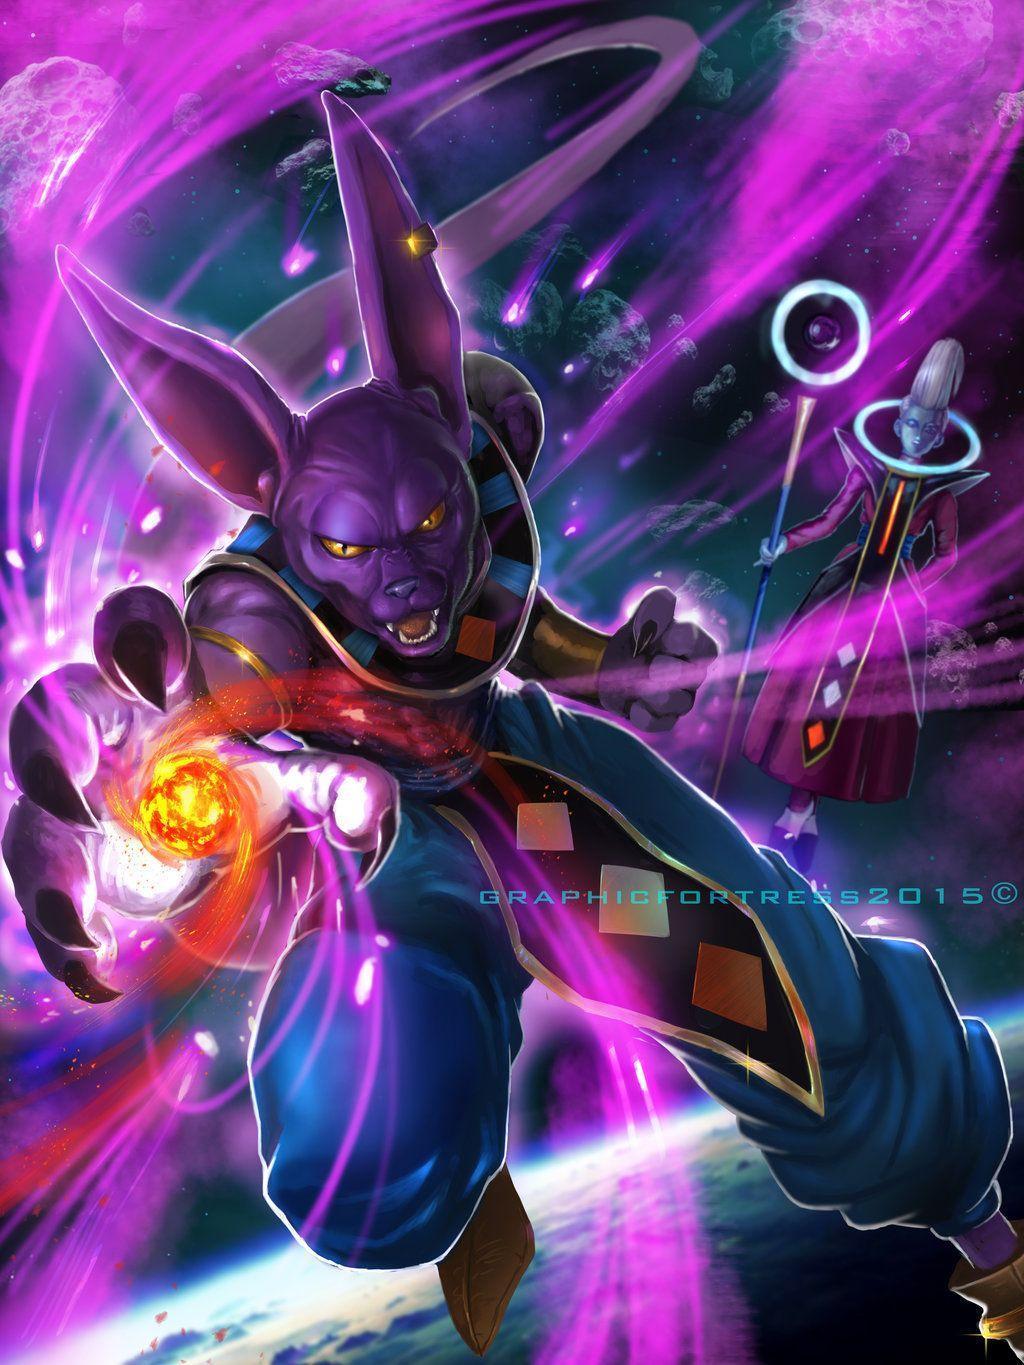 image about great lord beerus. Goku